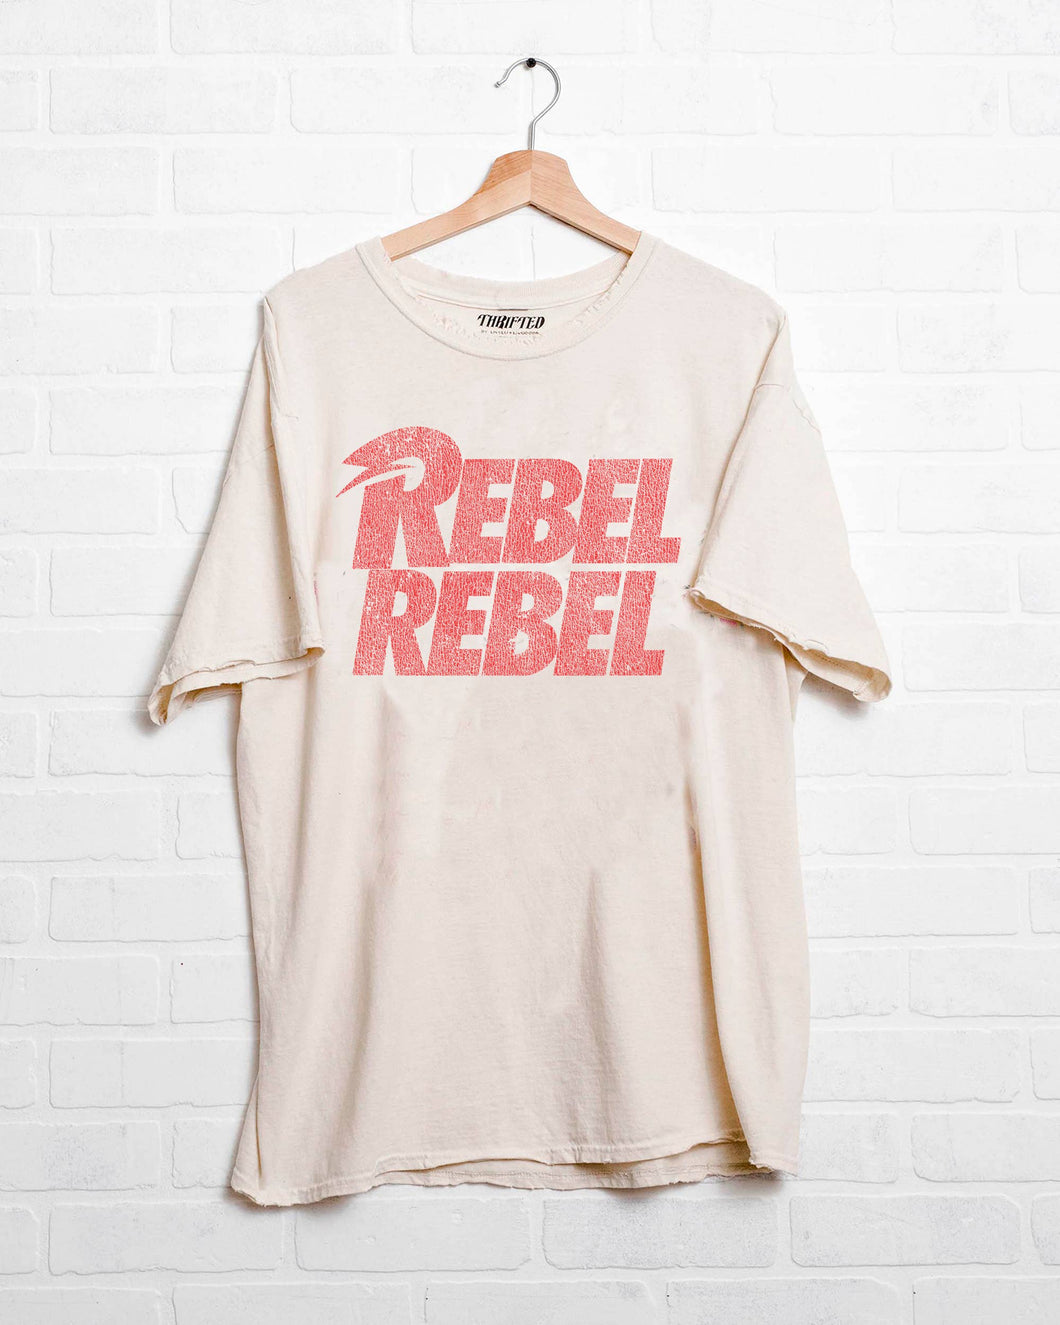 David Bowie Rebel Repeat Thrifted Graphic Tee